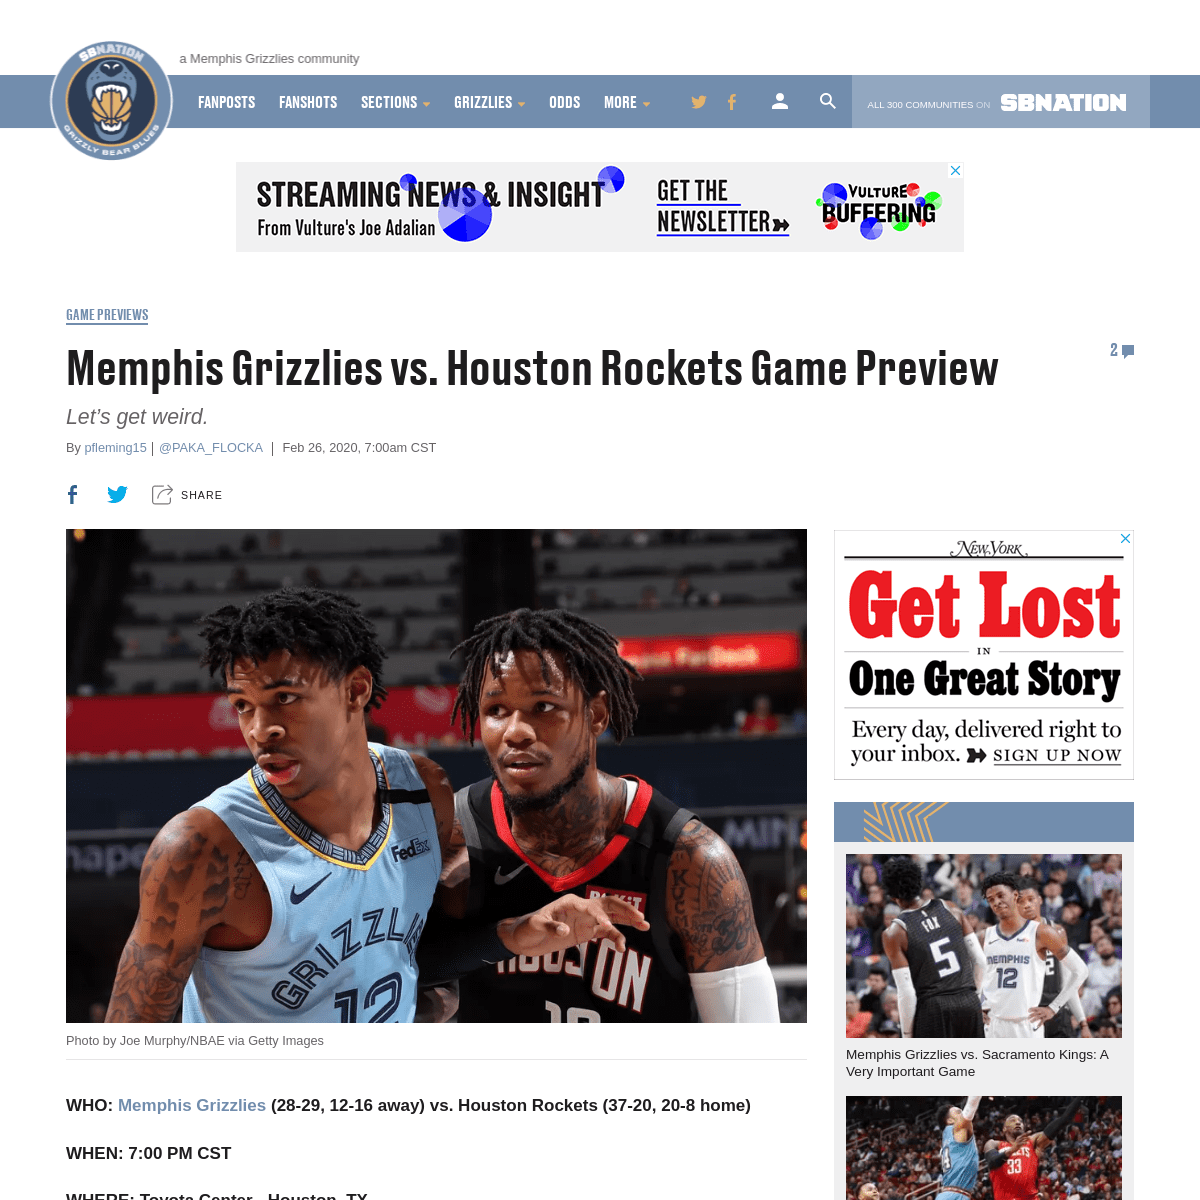 A complete backup of www.grizzlybearblues.com/2020/2/26/21153730/memphis-grizzlies-vs-houston-rockets-game-preview-nba-informati